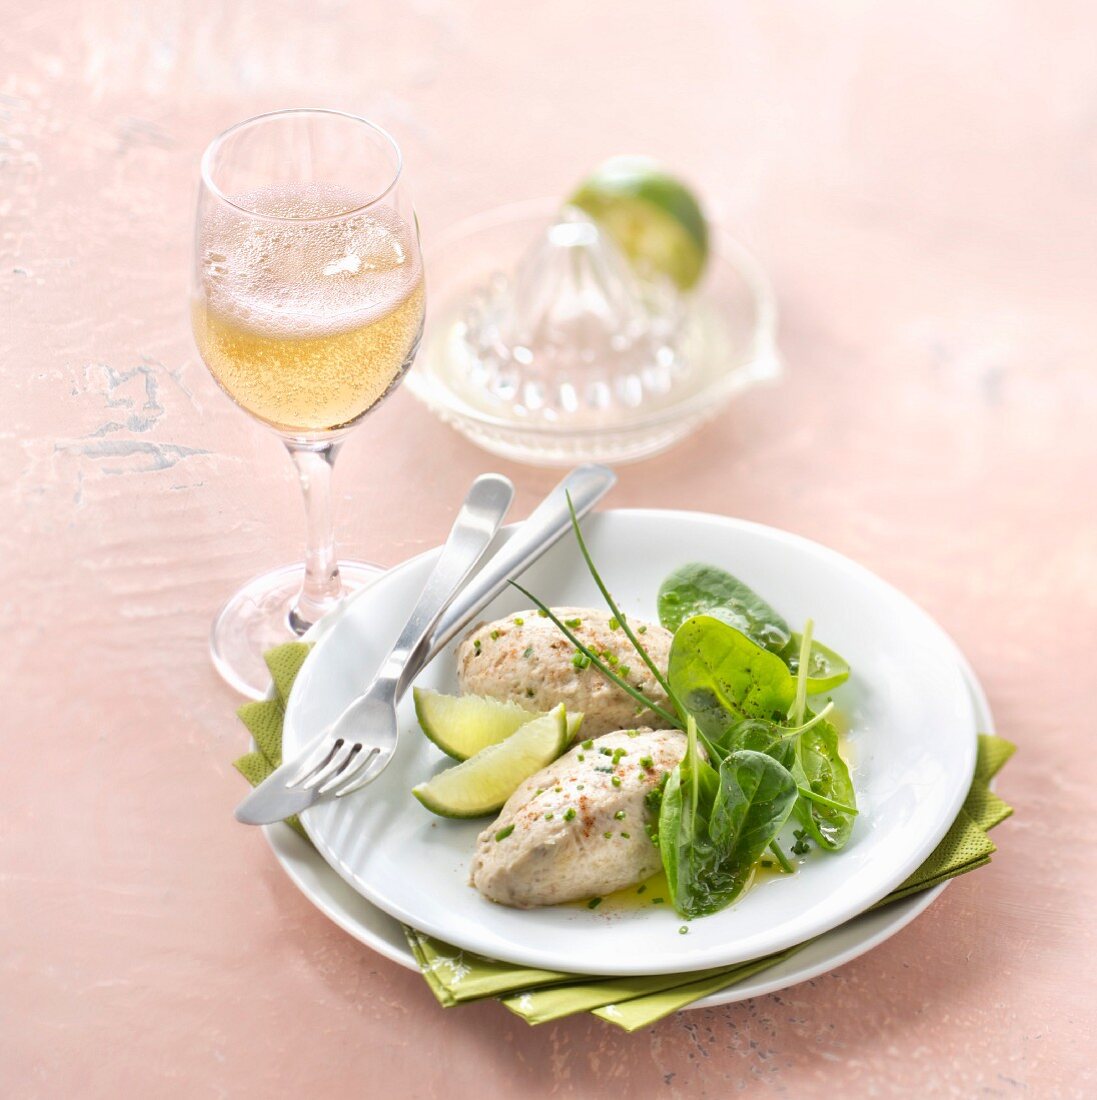 Mackerel and lime mousse with a glass of Crémant